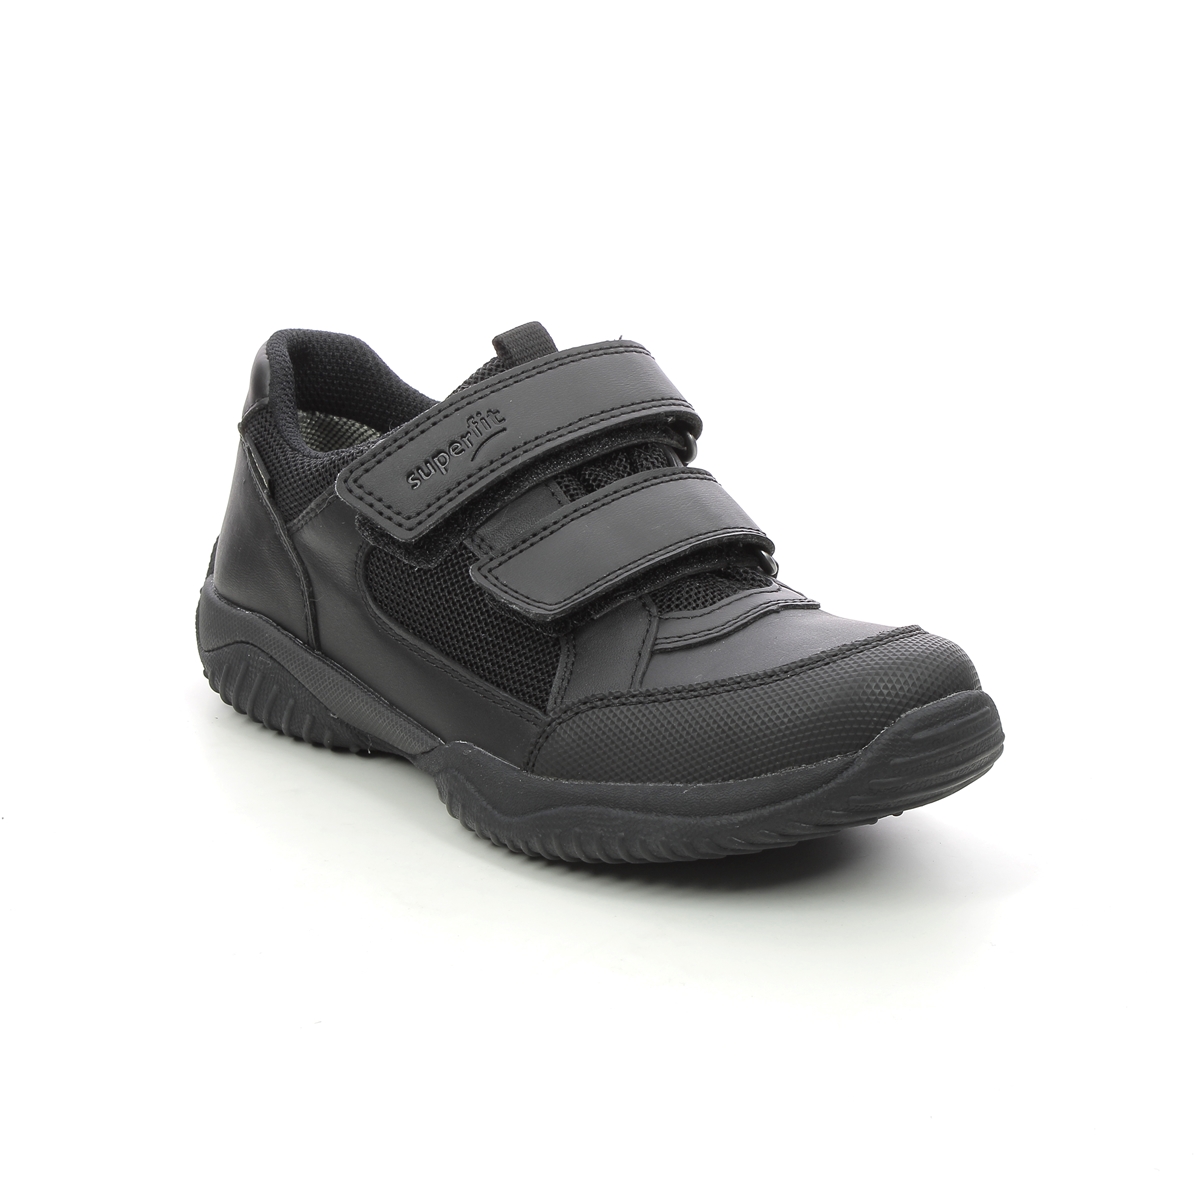 Superfit Storm Shoe Gtx Black Leather Kids Boys Casual Shoes 1009382-0000 In Size 33 In Plain Black Leather For kids